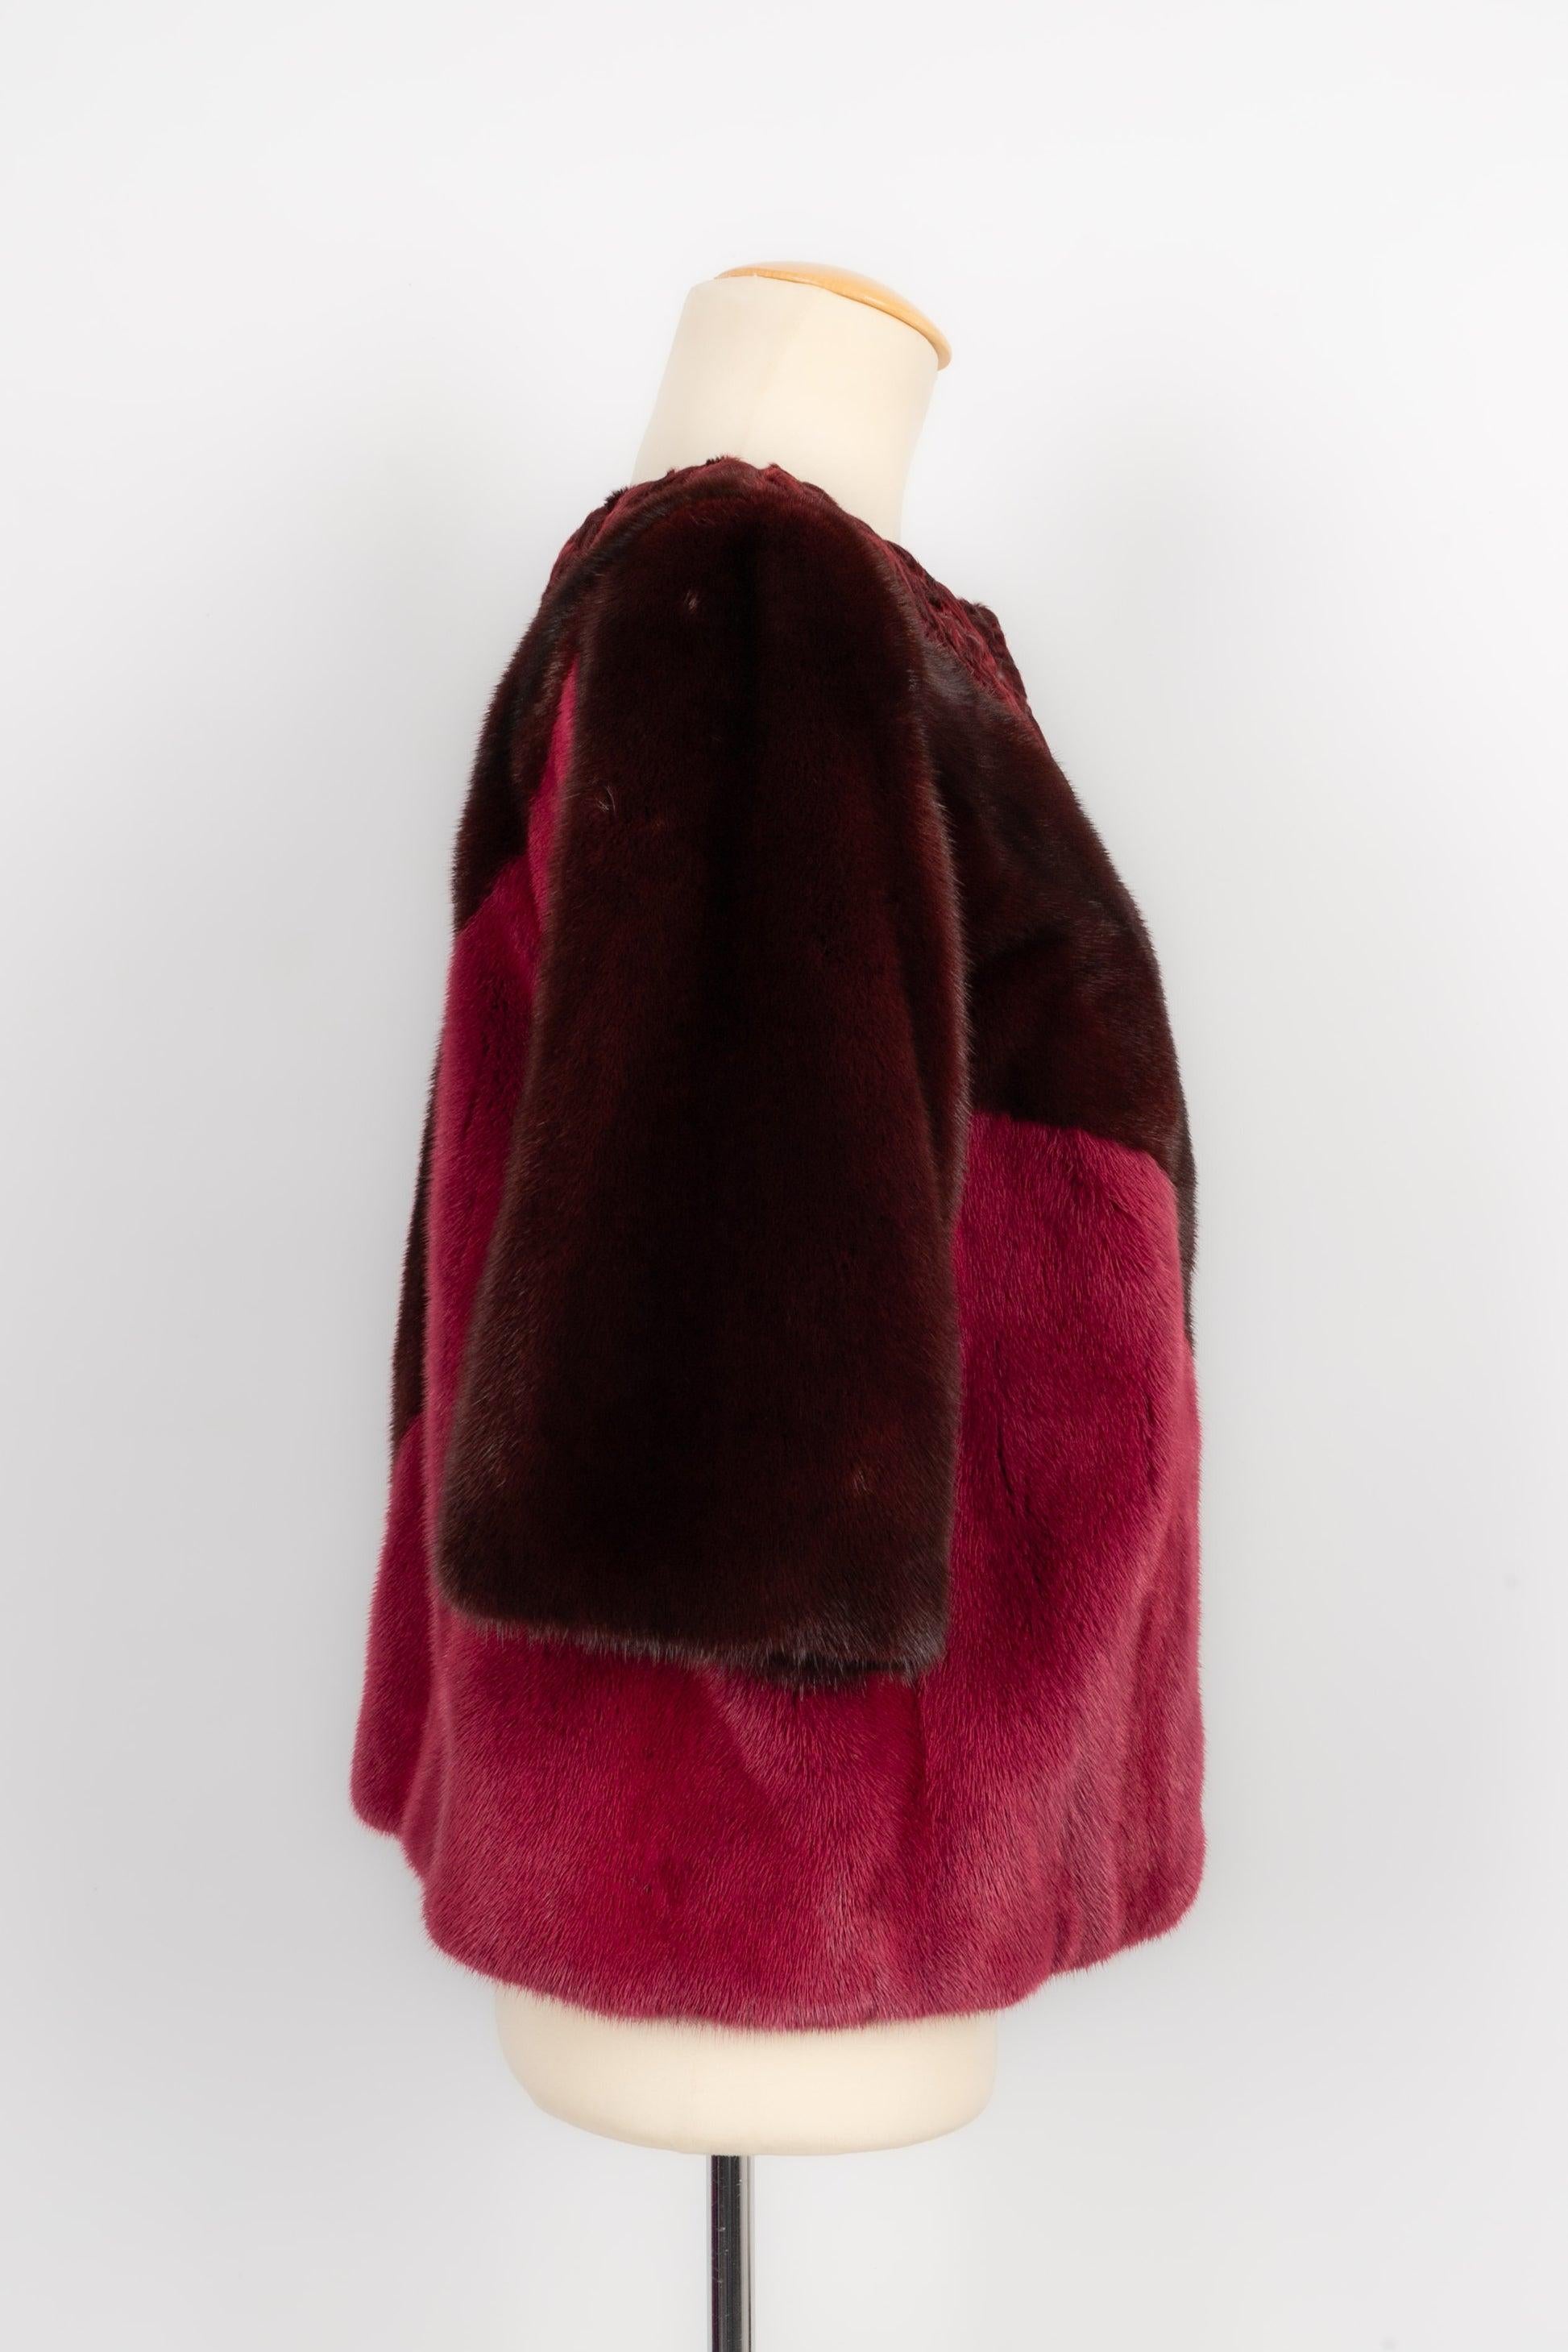 Dior - (Made in France) Burgundy-red and pink jacket in mink and lamb fur. Black silk lining. Size 38FR. Fall-Winter 2005 Collection.

Additional information:
Condition: Very good condition
Dimensions: Shoulder width: 41 cm - Sleeve length: 38 cm -